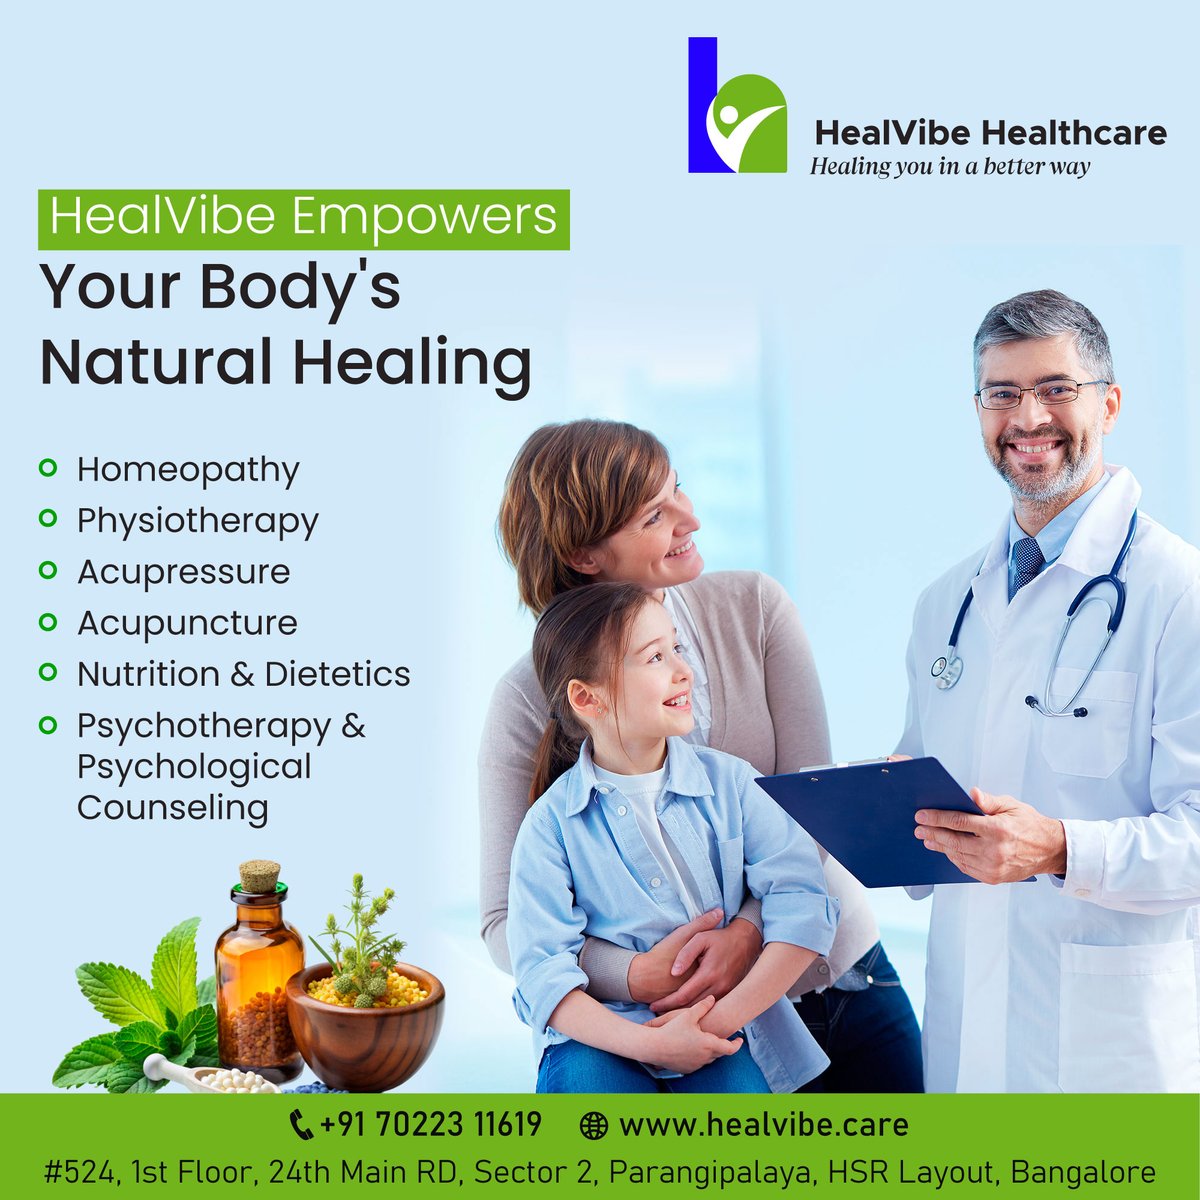 HealVibe Healthcare offers multiple holistic services designed to nurture your body's innate healing abilities Experience personalized care and support on your journey to optimal wellness and vitality

#HealVibeWellness #HolisticHealingJourney #NurturingVitality #OptimalWellness